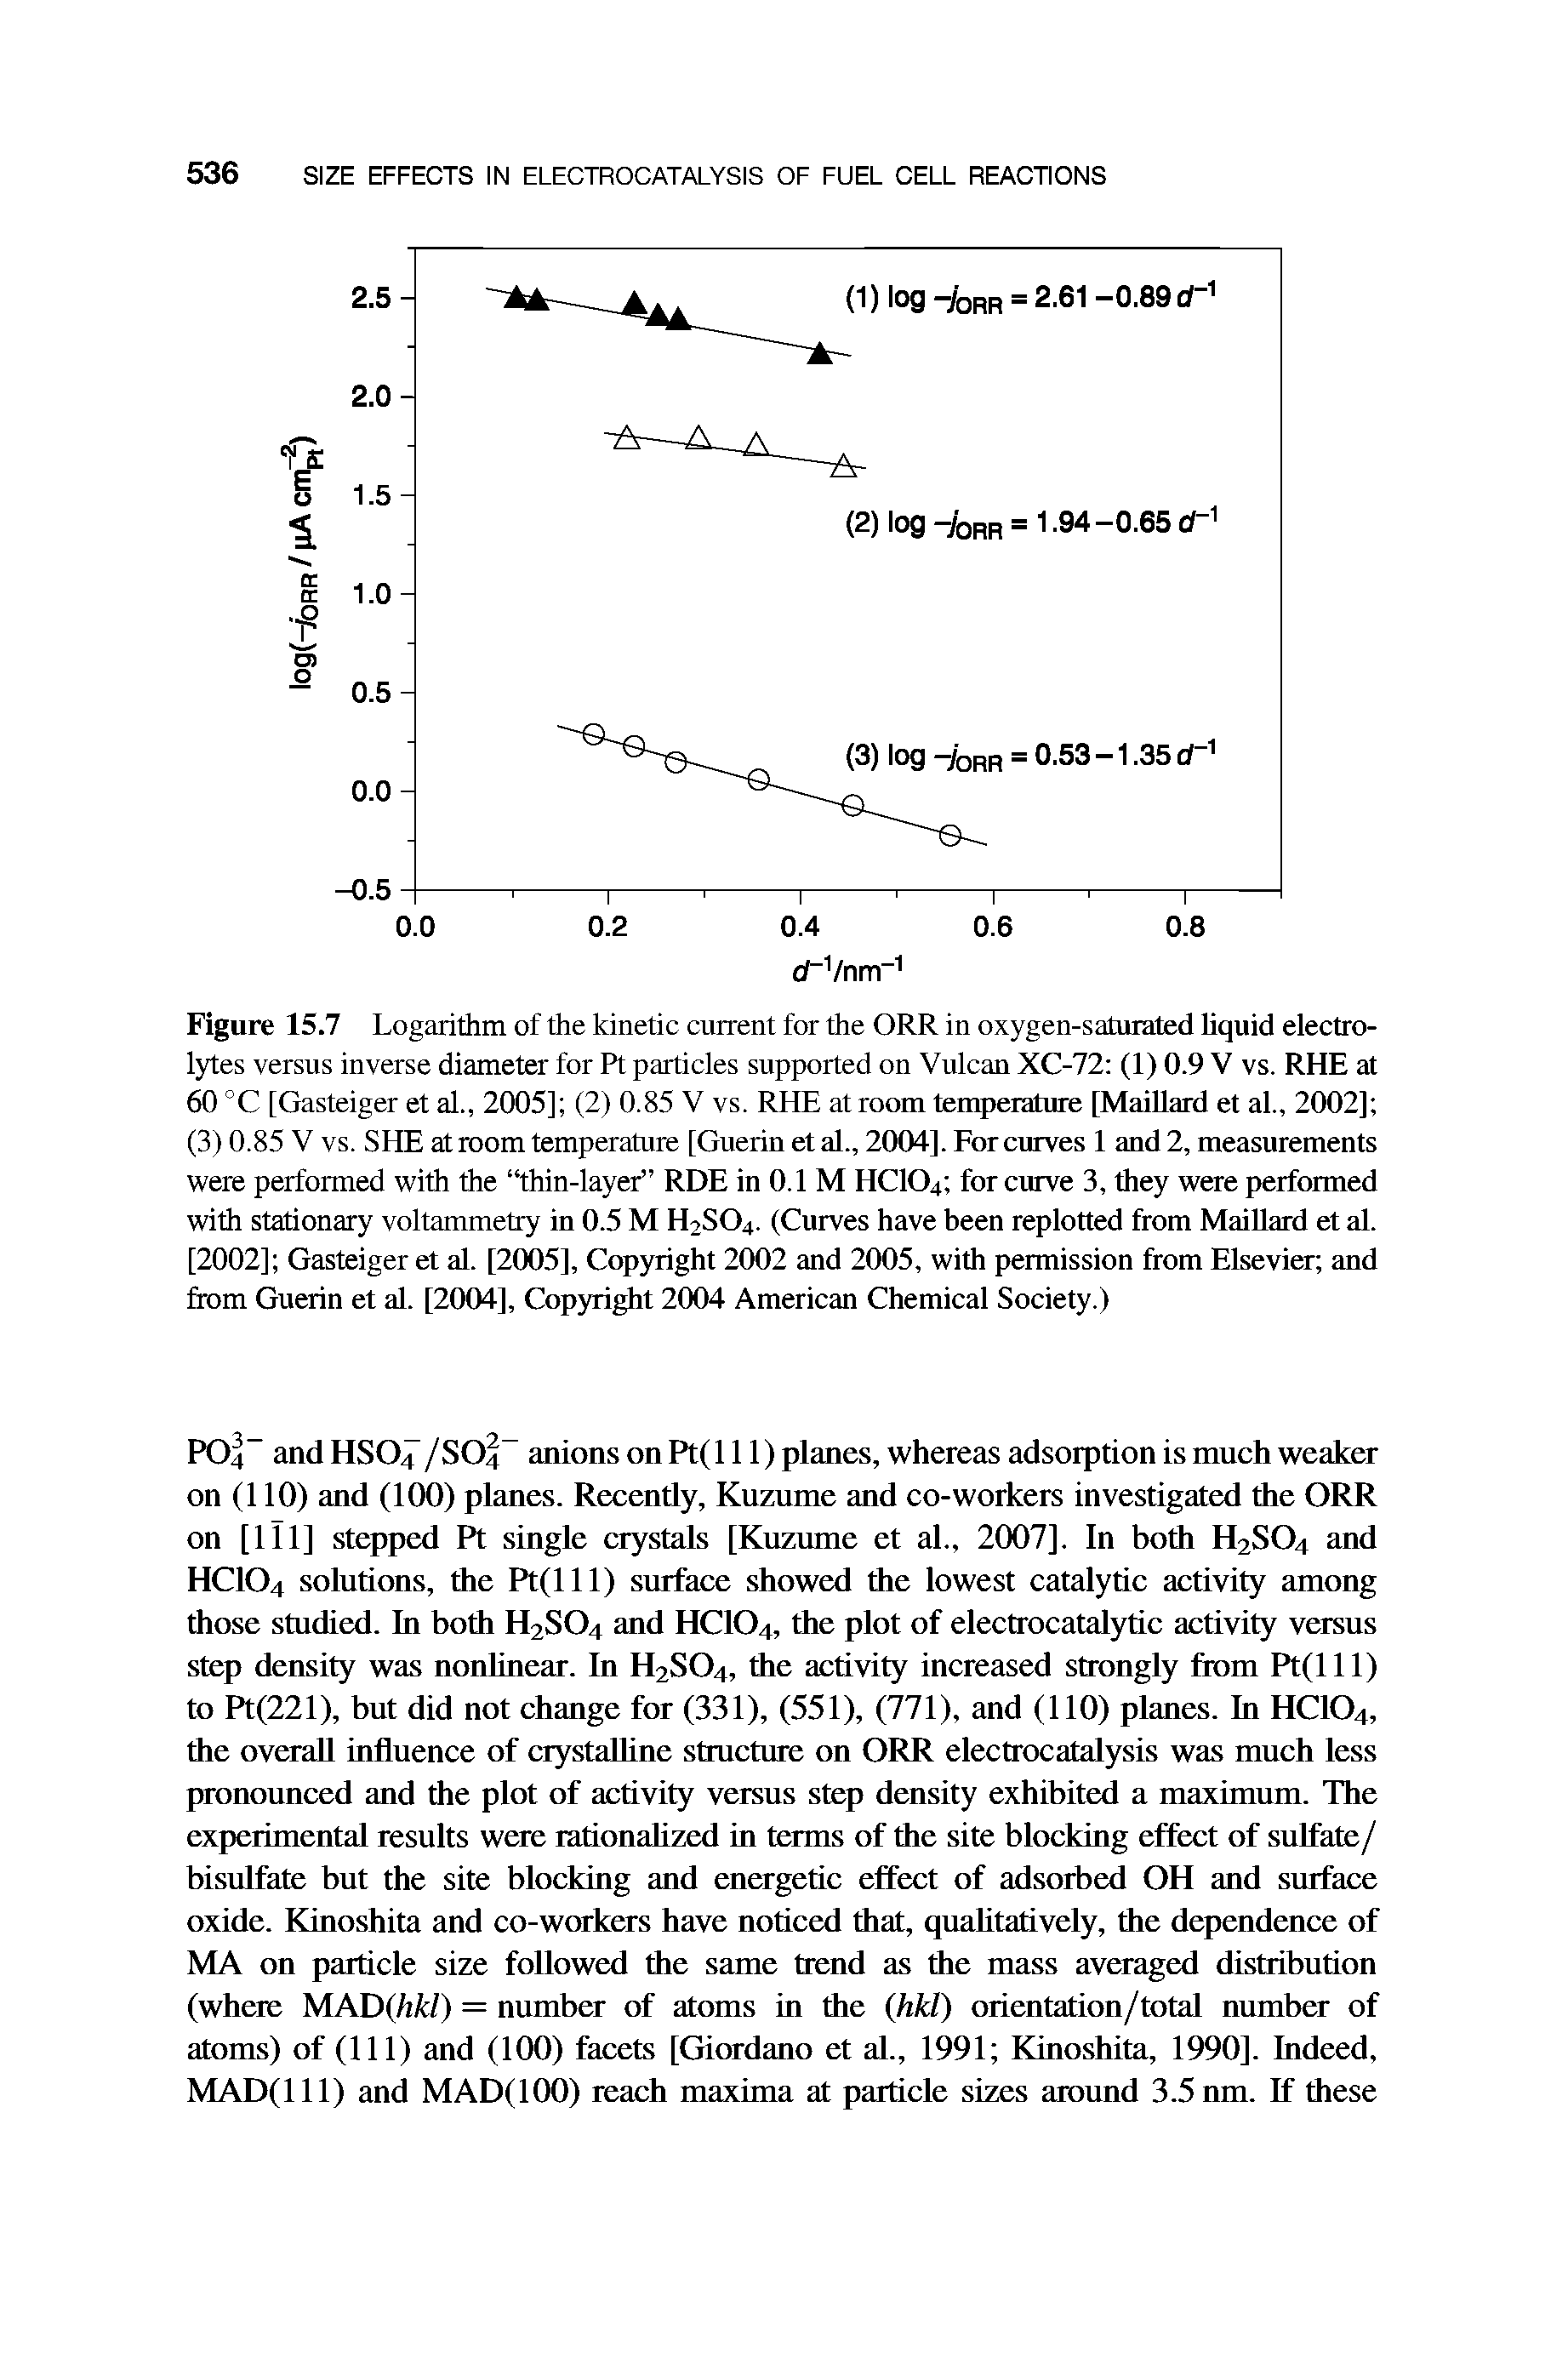 Figure 15.7 Logarithm of the kinetic current for the ORR in oxygen-saturated liquid electrolytes versus inverse diameter for Pt particles supported on Vulcan XC-72 (1) 0.9 V vs. RHE at 60 °C [Gasteiger et al., 2005] (2) 0.85 V vs. RHE at room temperature [MaiUard et al., 2002] (3)0.85 V vs. SHE at room temperature [Guerin etal., 2004]. For curves 1 and 2, measurements were performed with the thin-layer RDE in 0.1 M HCIO4 for curve 3, they were performed with stationary voltammetry in 0.5 M H2SO4. (Curves have been replotted from MaiUard et al. [2002] Gasteiger et al. [2005], Copyright 2002 and 2005, with permission from Elsevier and from Guerin et al. [2004], Copyright 2004 American Chemical Society.)...